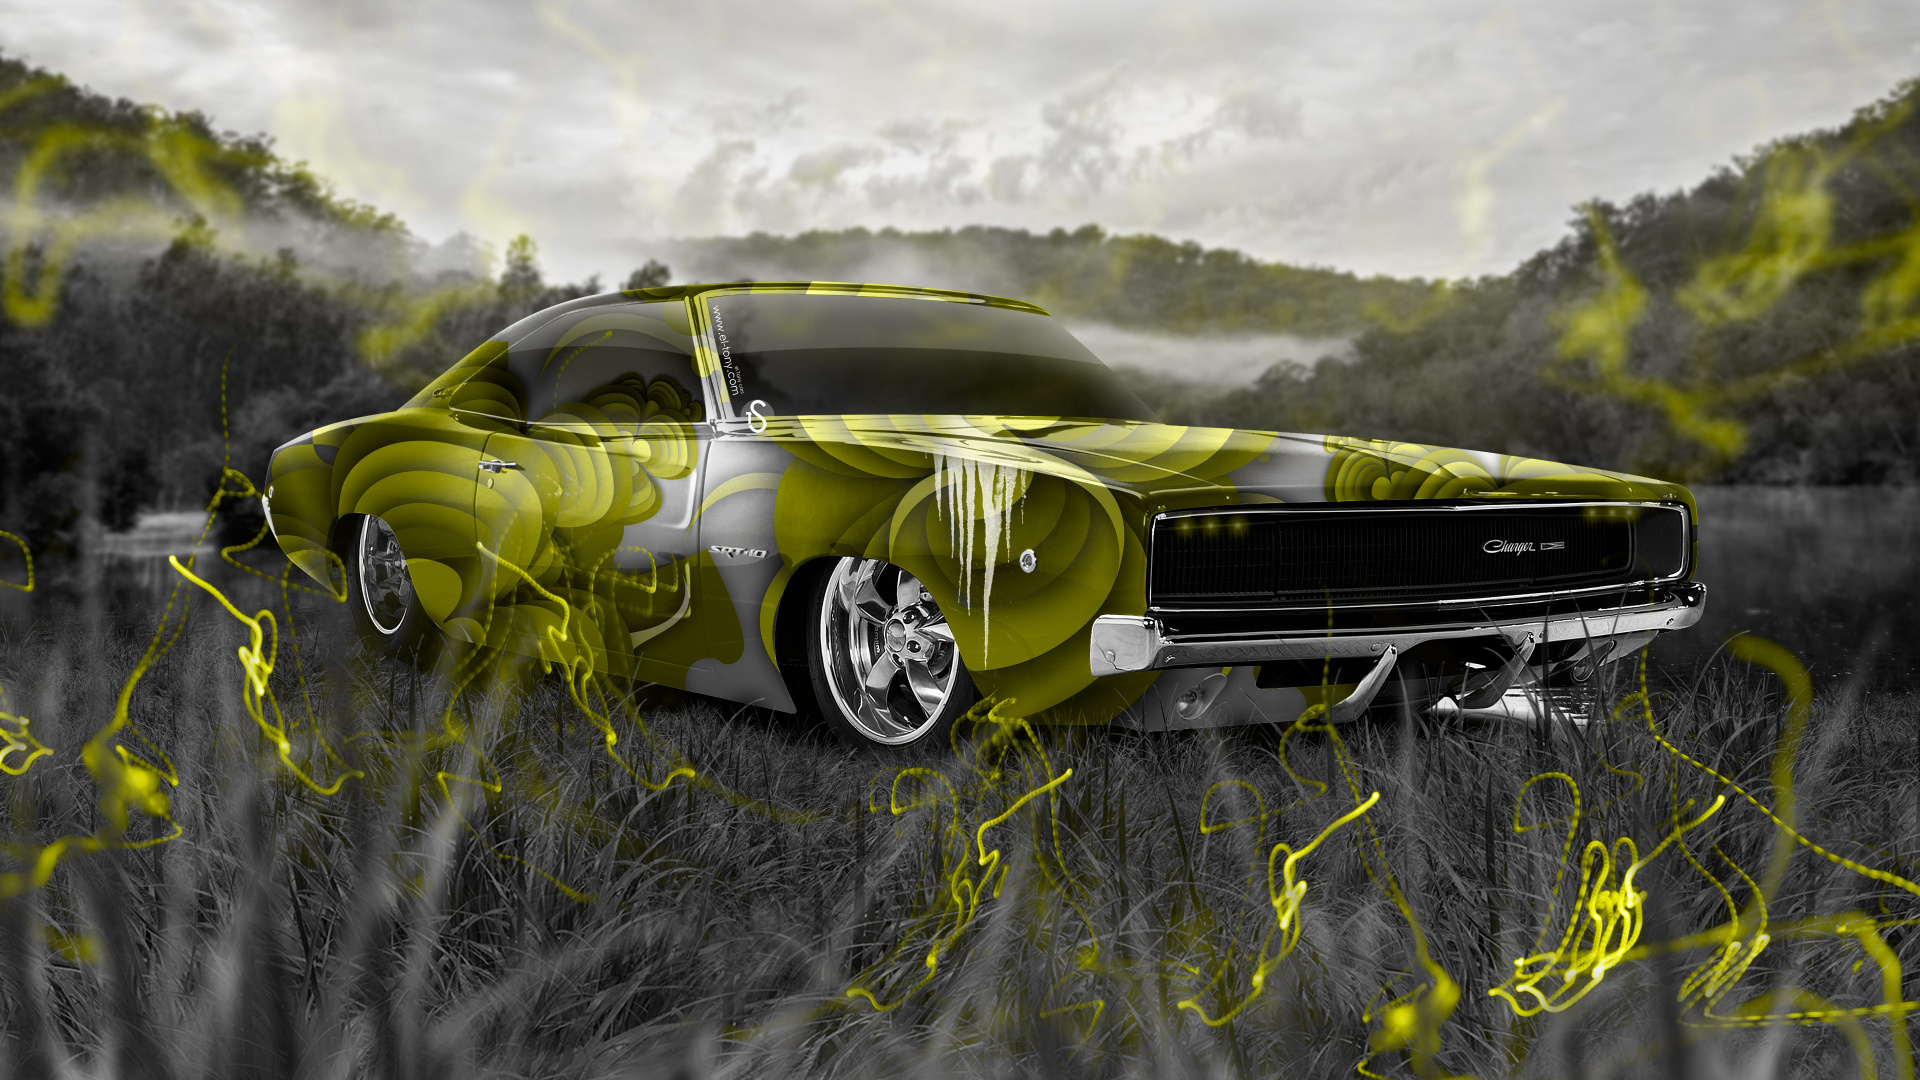 Yellow and Black Chevrolet Camaro on Green Grass Field During Daytime. Wallpaper in 1920x1080 Resolution